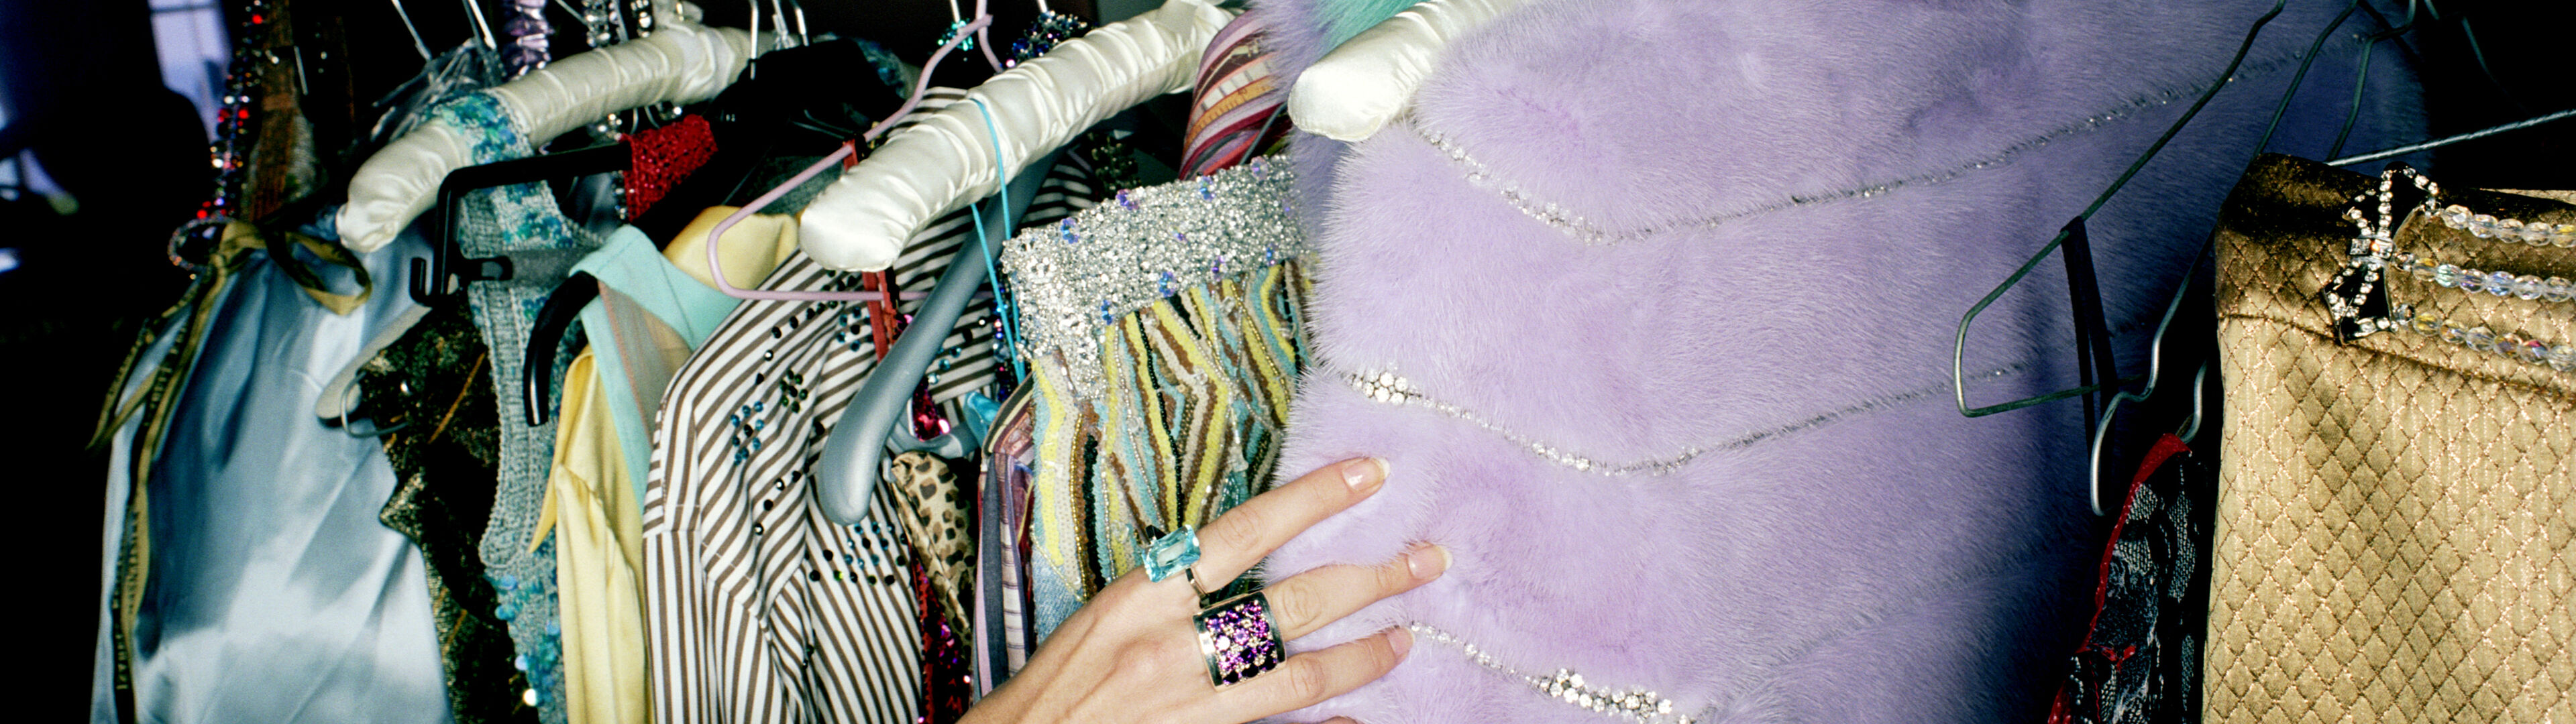 A hand touches a furry purple garment among a variety of colorful clothes on hangers.